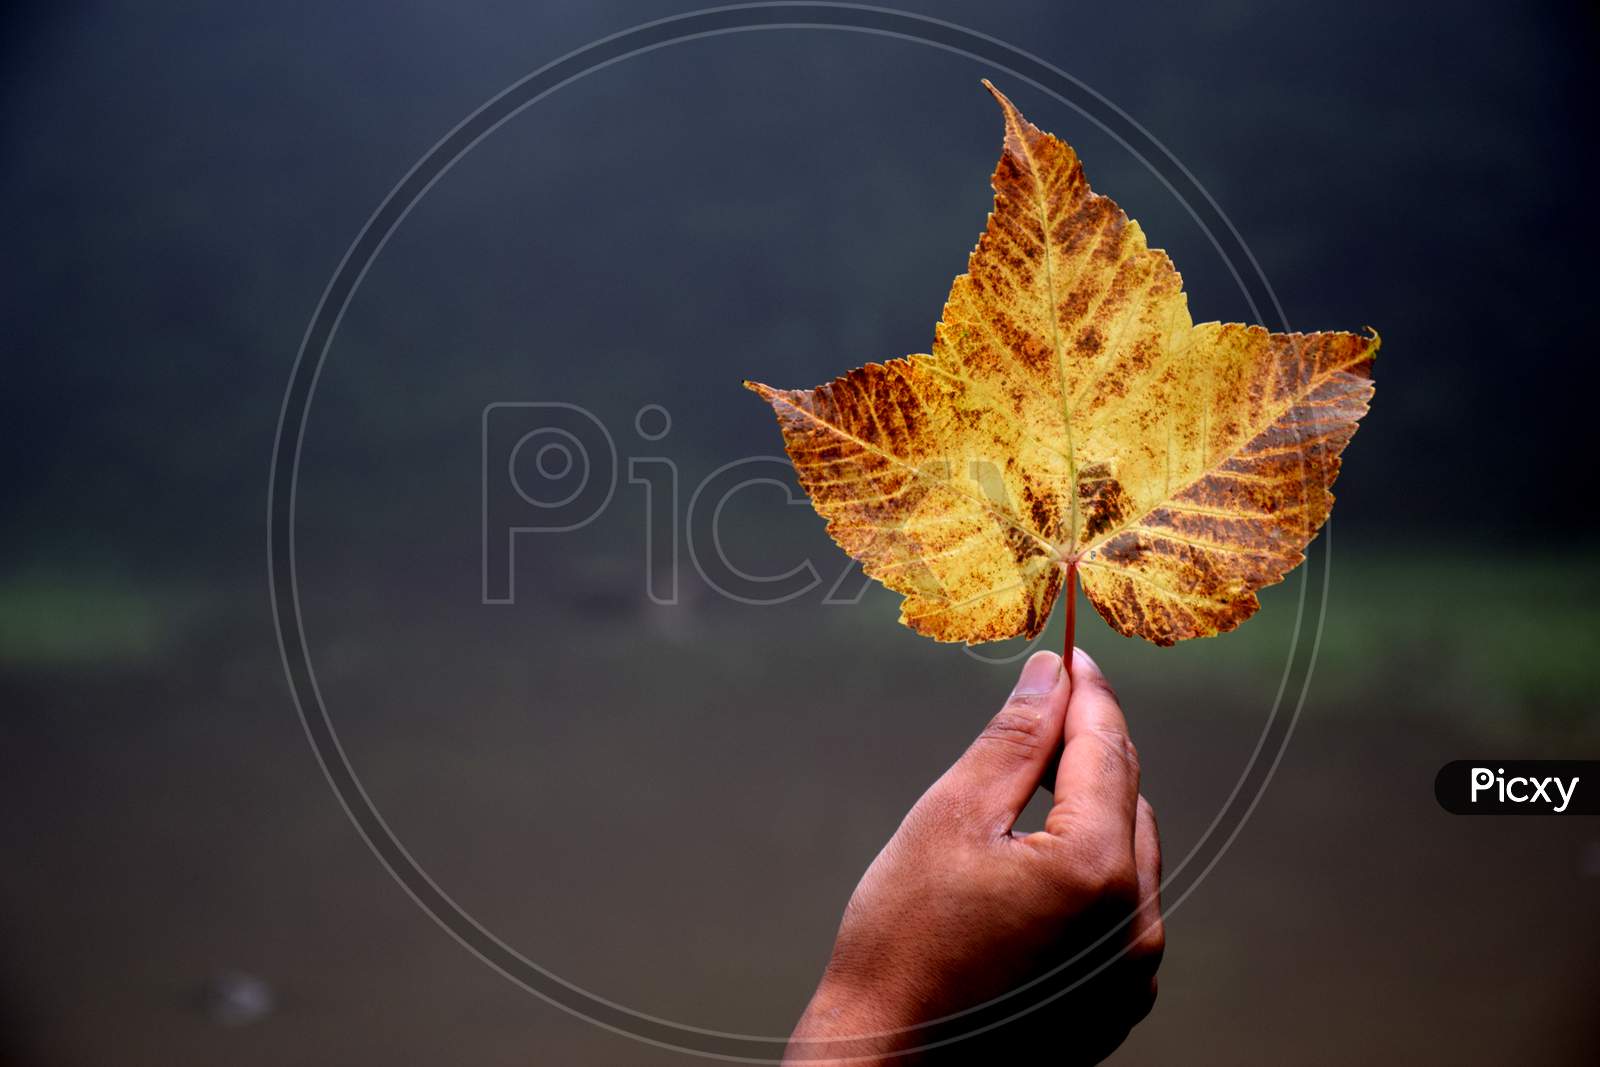 Beautiful Picture Of Yellow Big Leaf In Hand